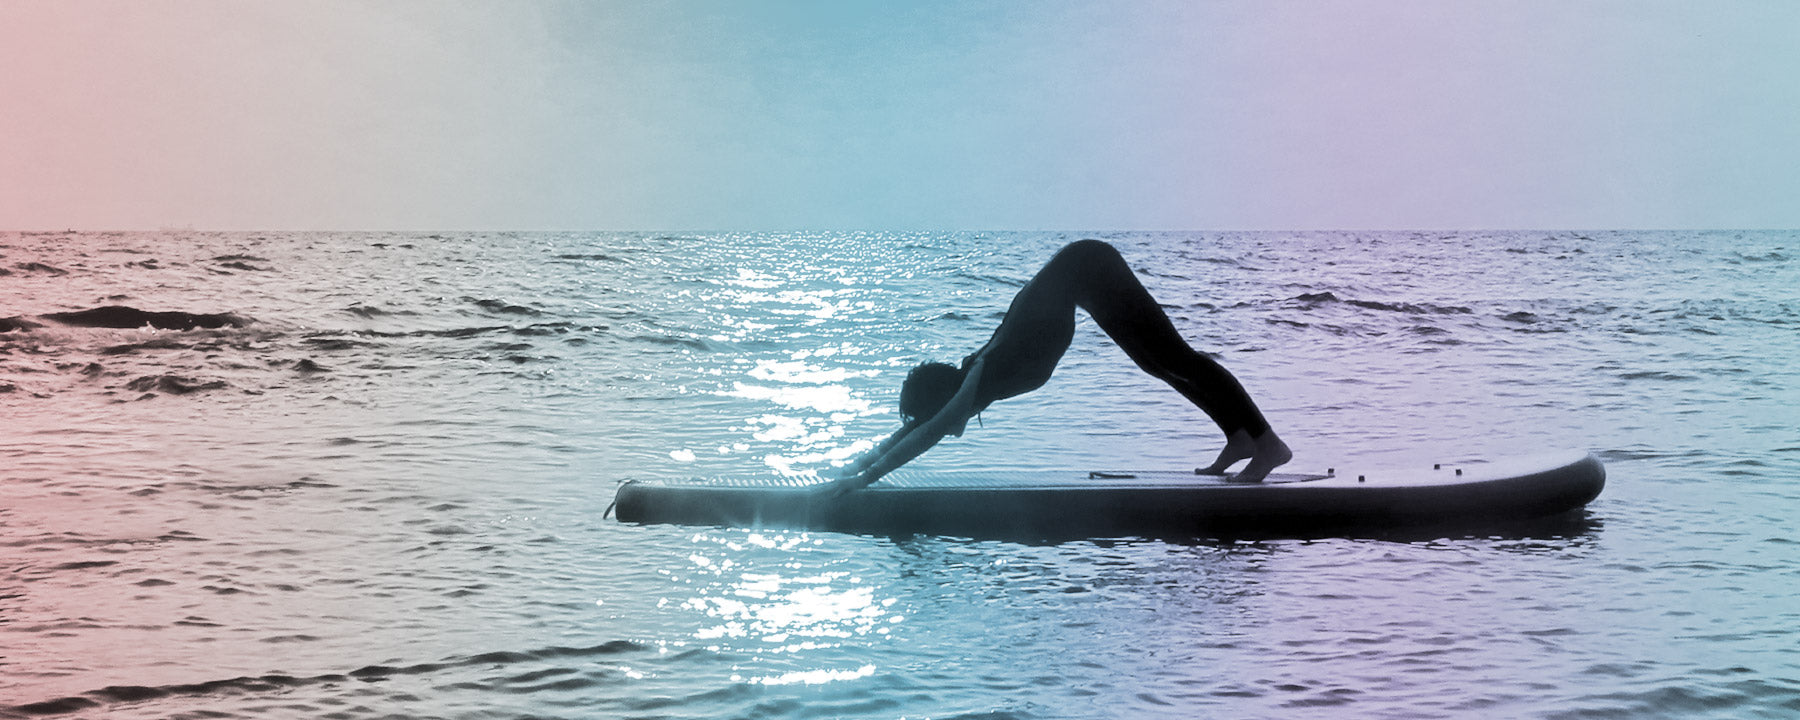 Paddleboard Yoga: Beginner Poses To Get You Started - Turn The Tide, by HeySurf